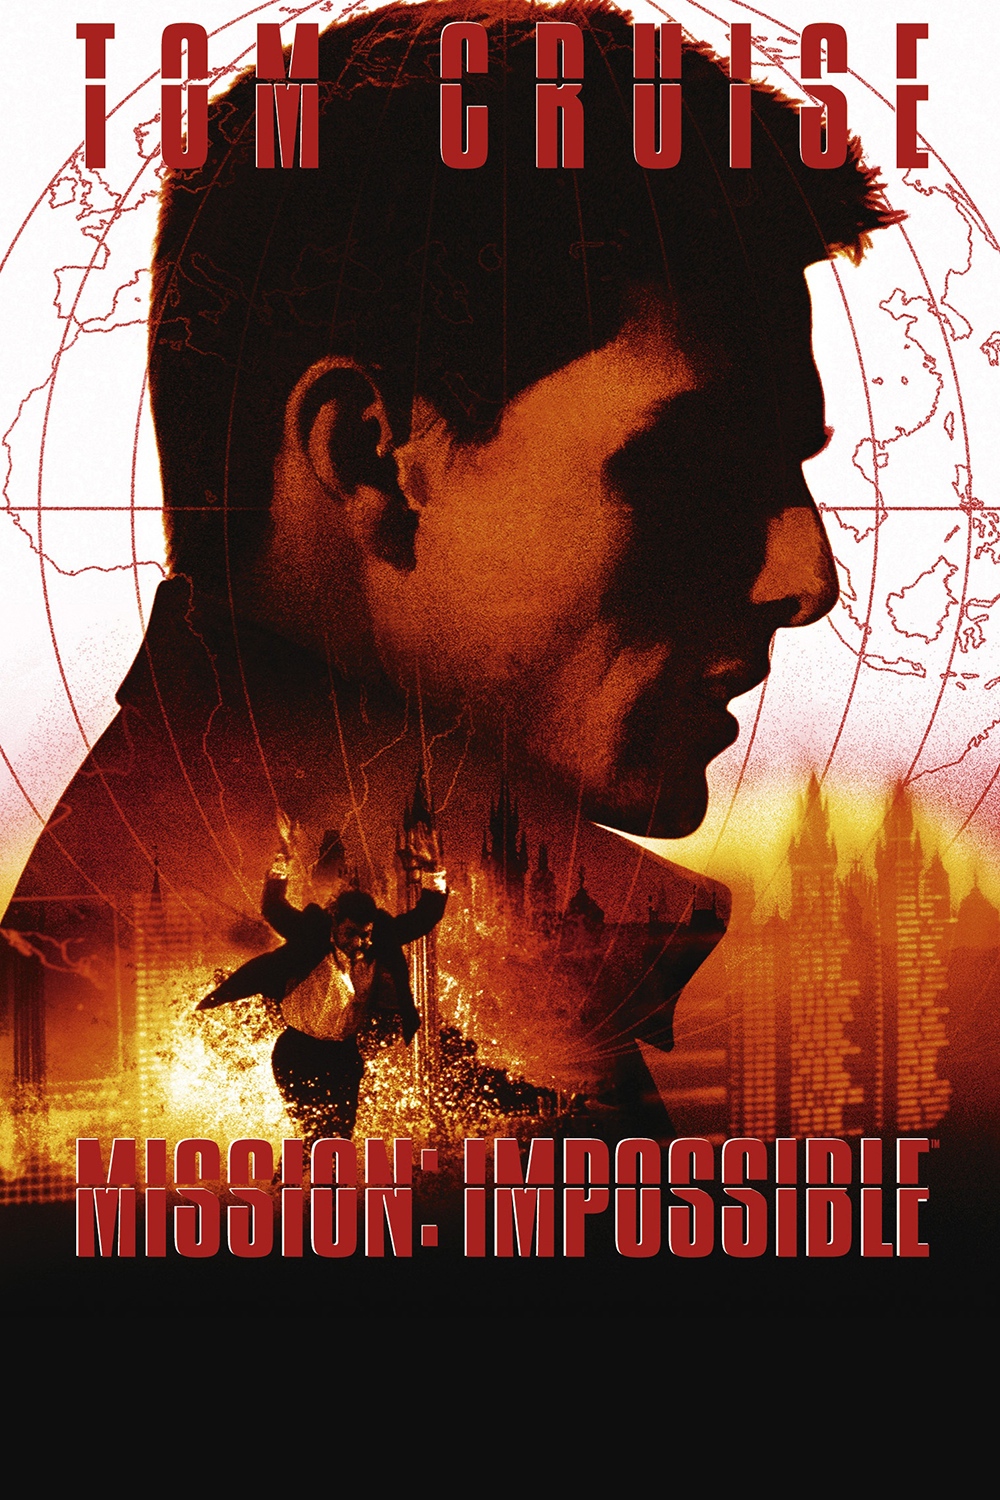 Category:Mission: Impossible Films | Cinemorgue Wiki ...